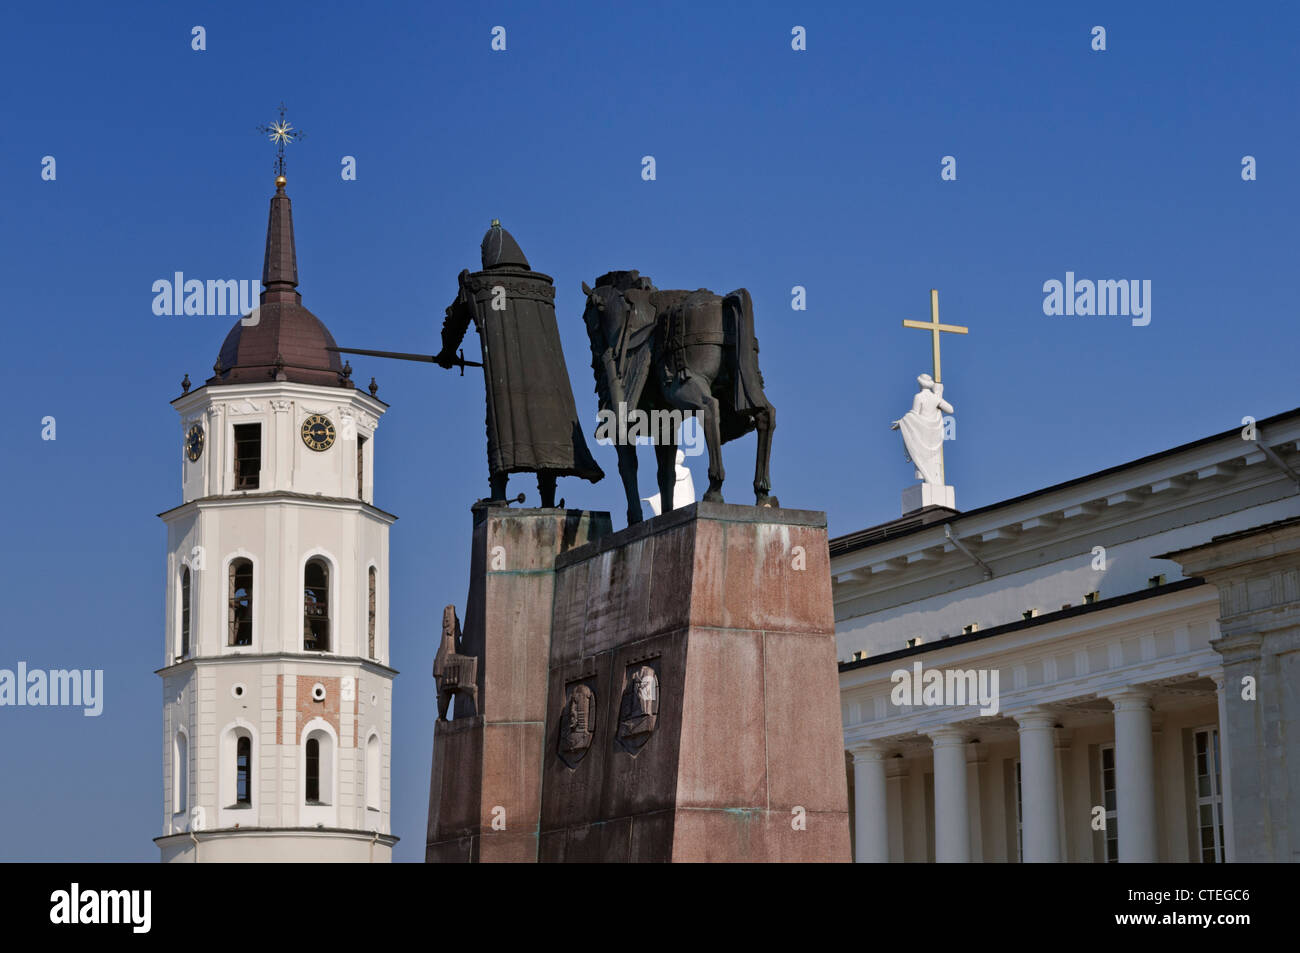 Grand Duke Gediminas Statue and Cathedral Belfry Cathedral Square Vilnius Lithuania Stock Photo